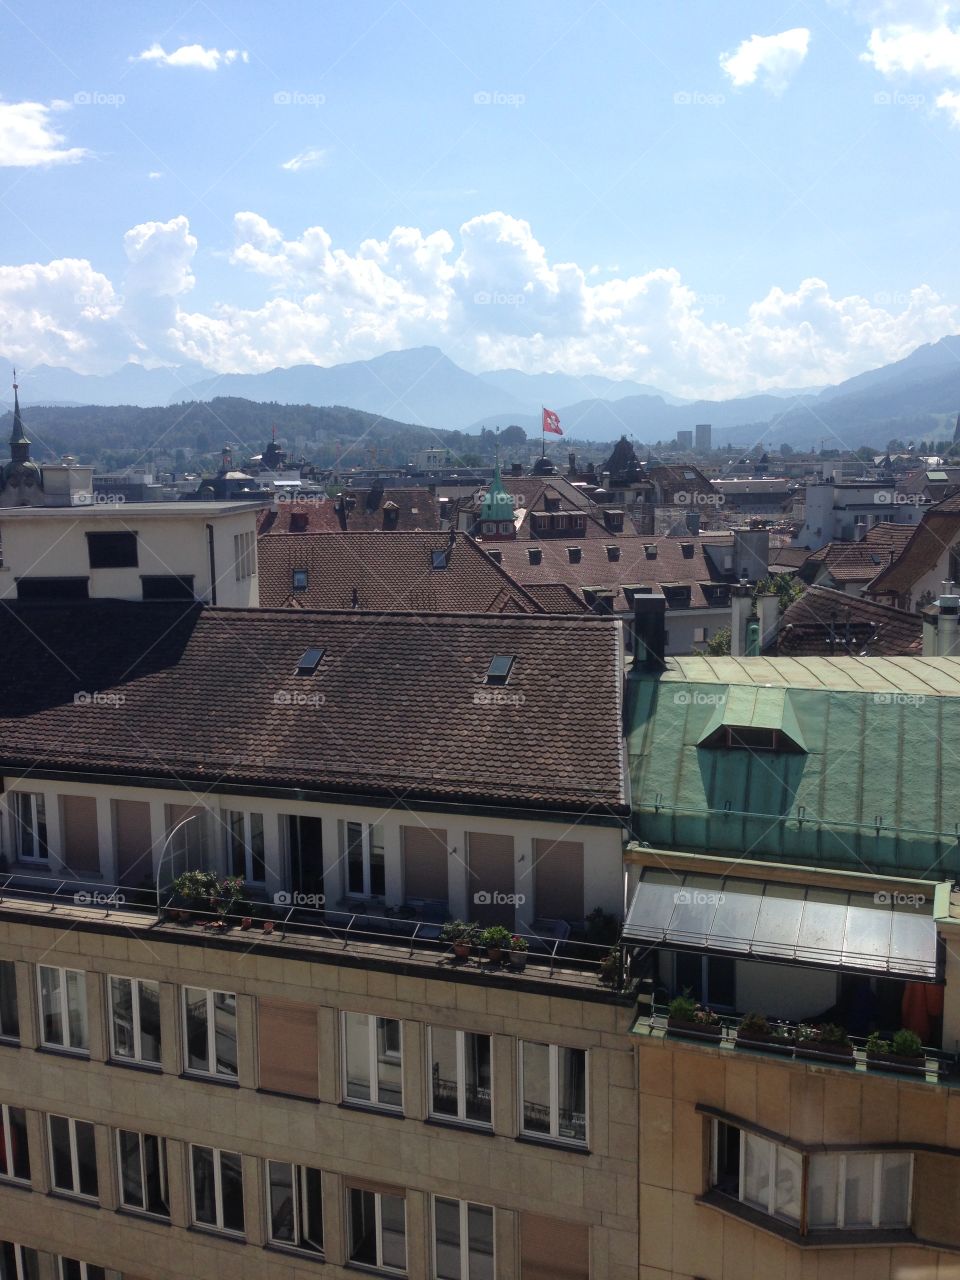 Rooftop view from a local business. Taken in Lucerne, Switzerland